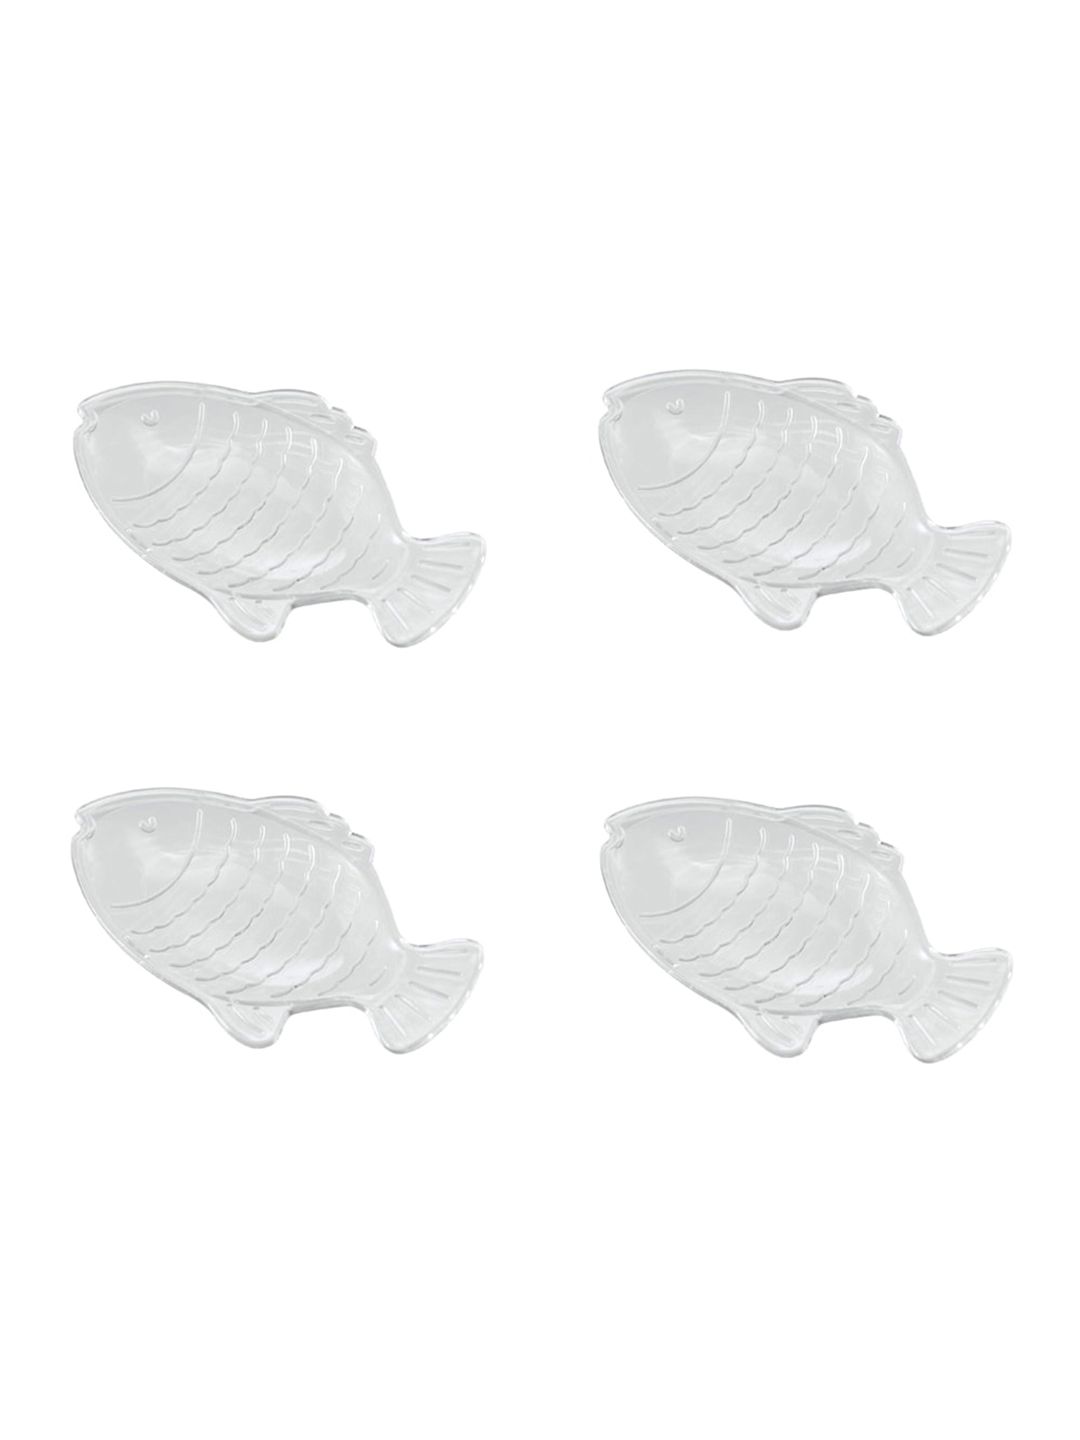 INTERDESIGN Adults Set Of 4 Transparent Fish Shaped Plastic Bar Soap Holder Price in India